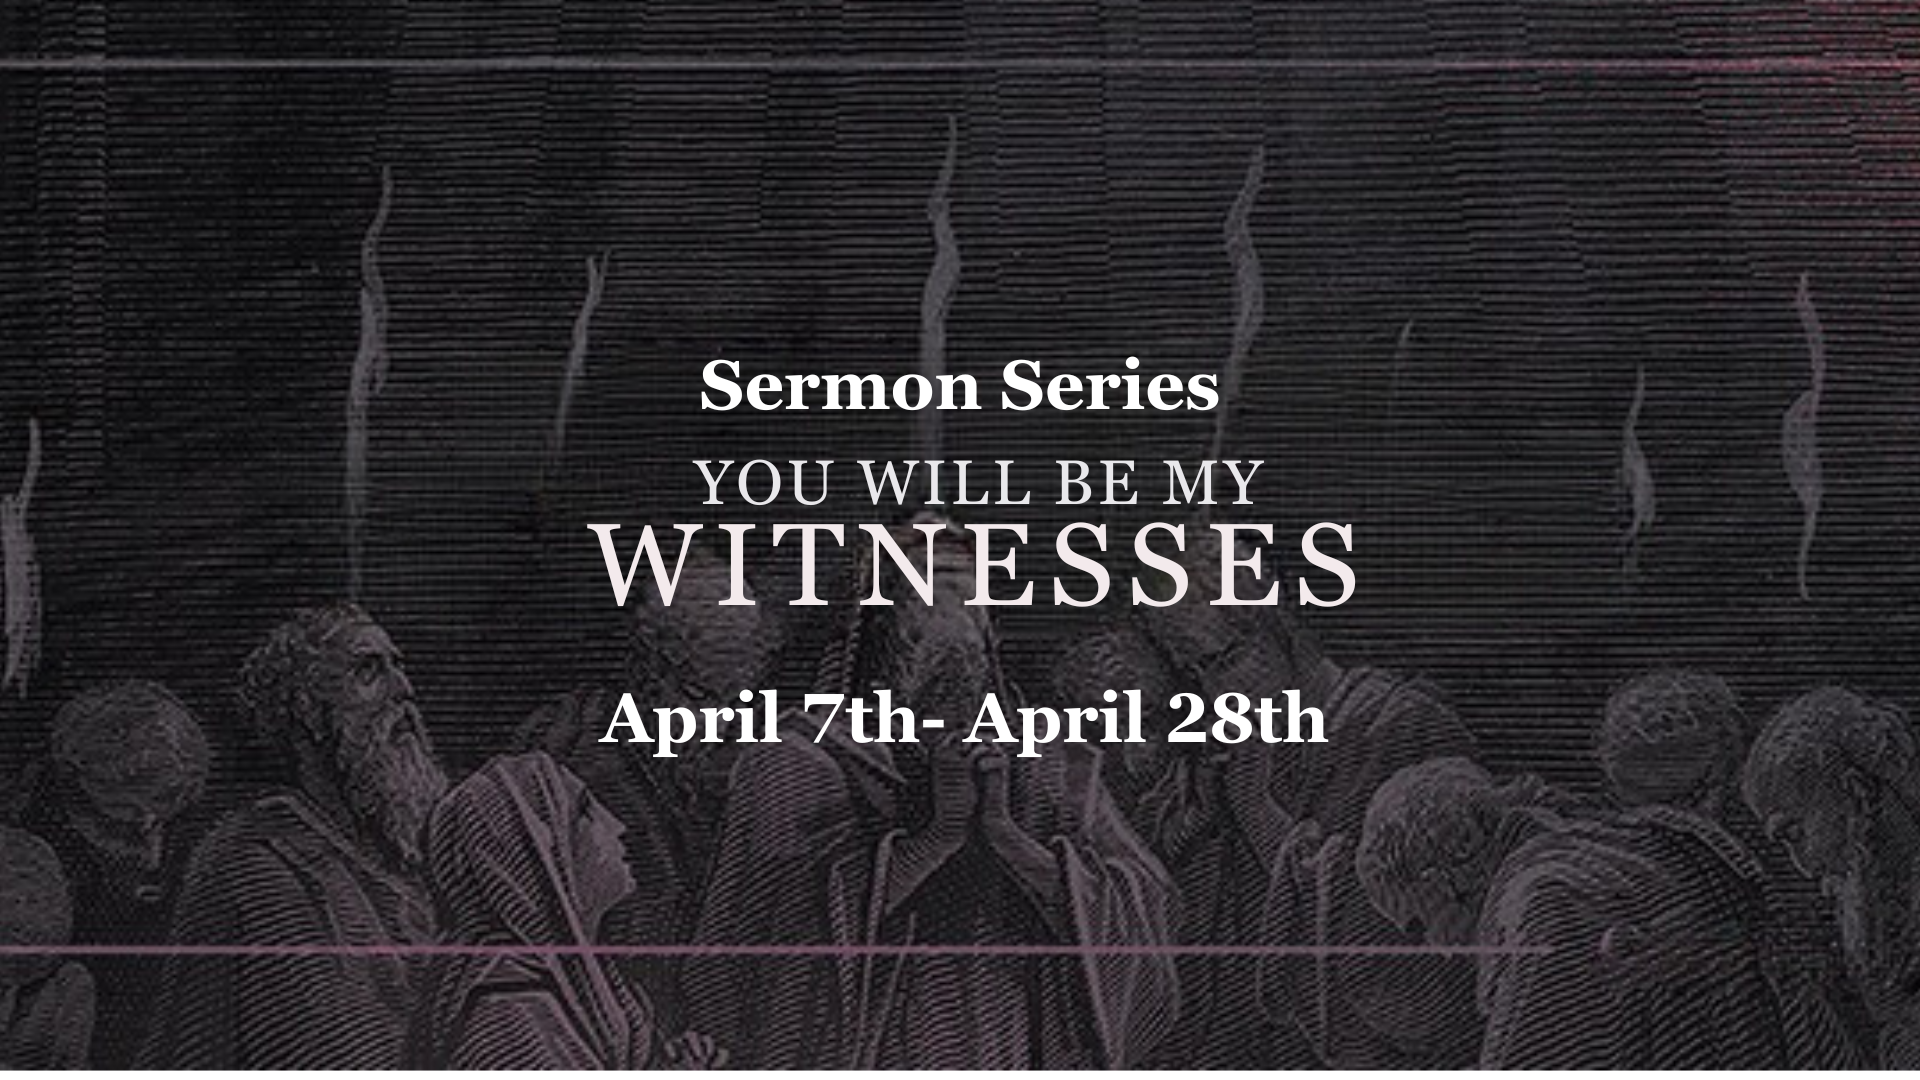 Sermon Series - You Will Be My Witnesses